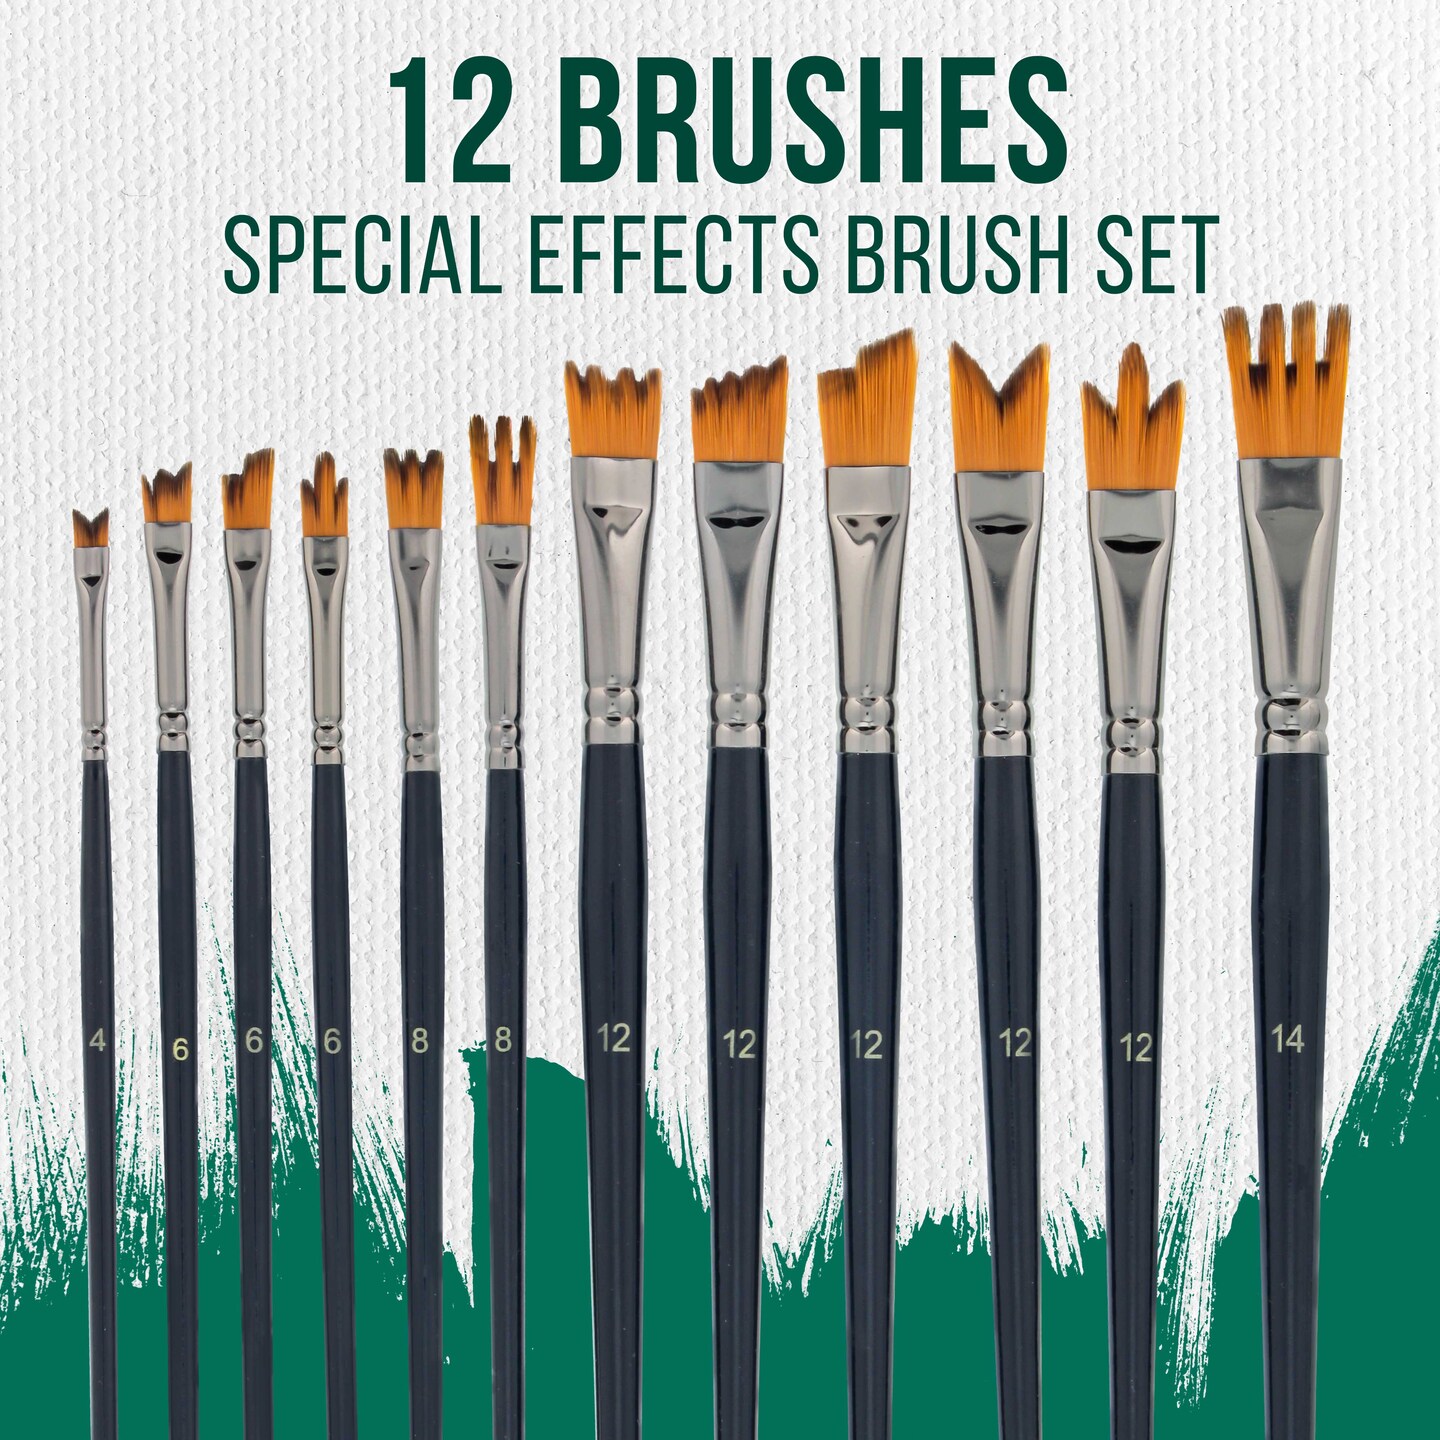 Necessities™ Brown Synthetic Brush Set by Artist's Loft™